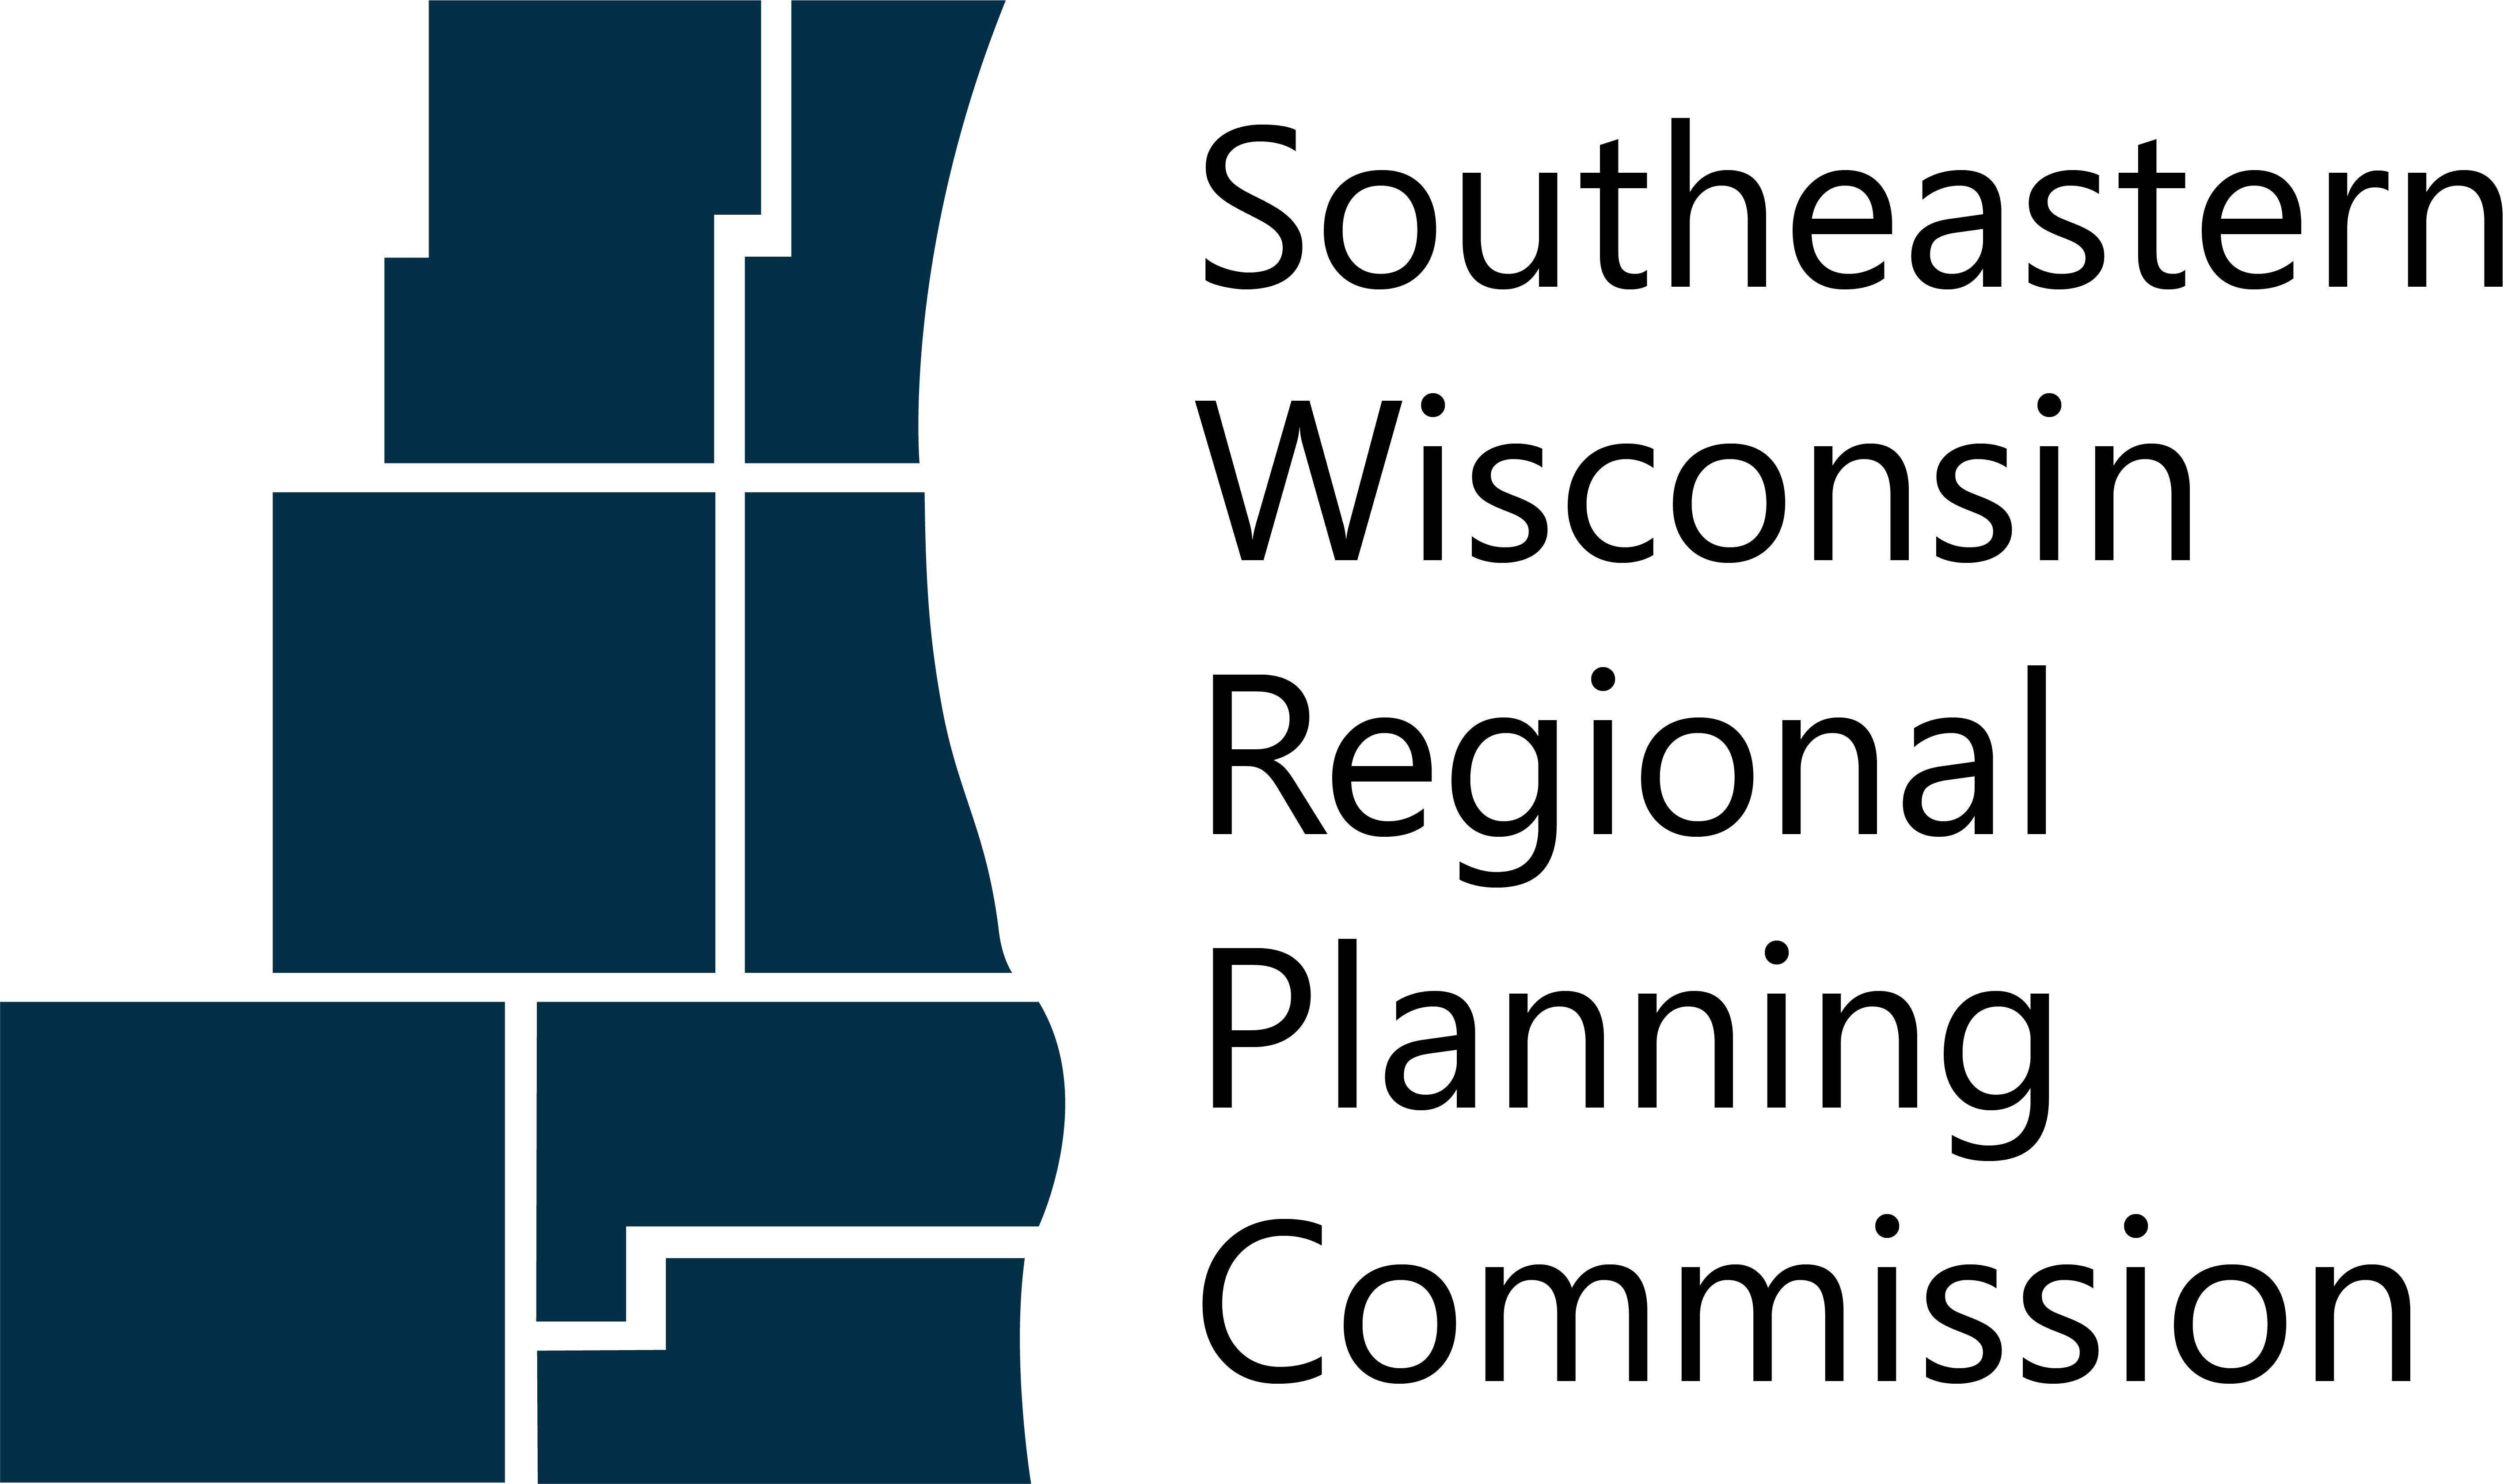 The Southeastern Wisconsin Regional Planning Commission Logo